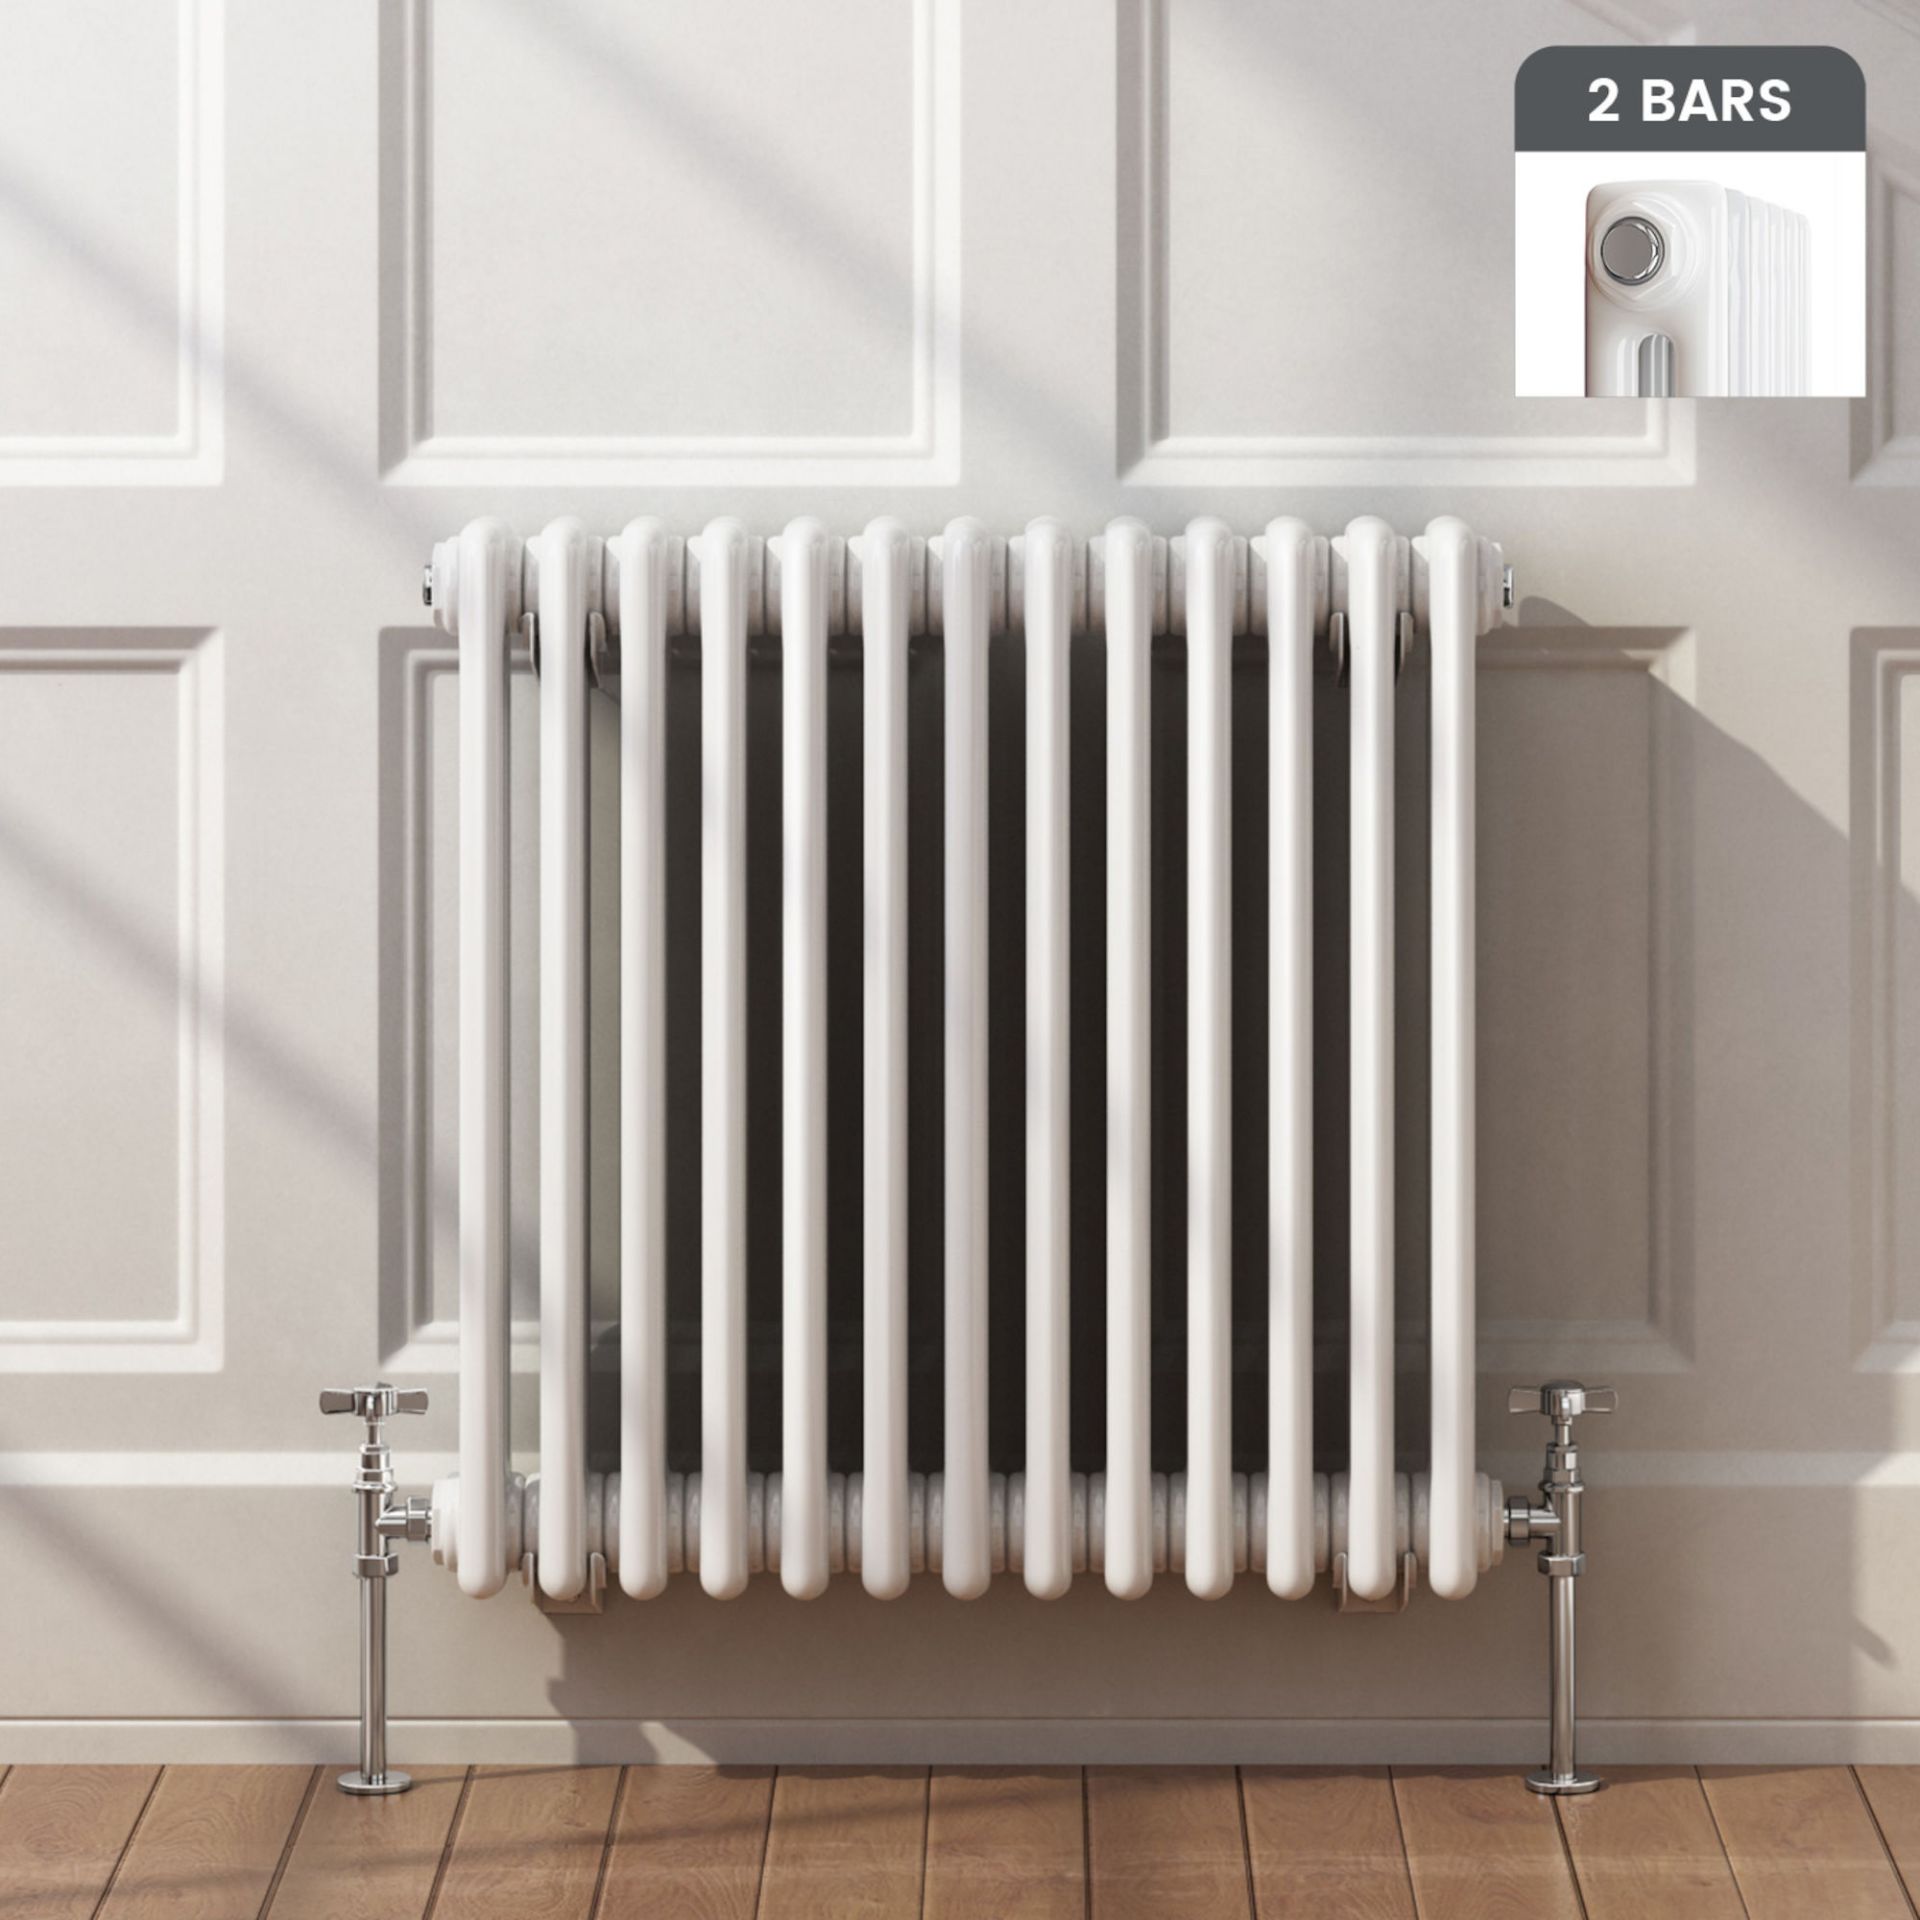 (OS263) 600x603mm White Double Panel Horizontal Colosseum Traditional Radiator. RRP £395.99. Made